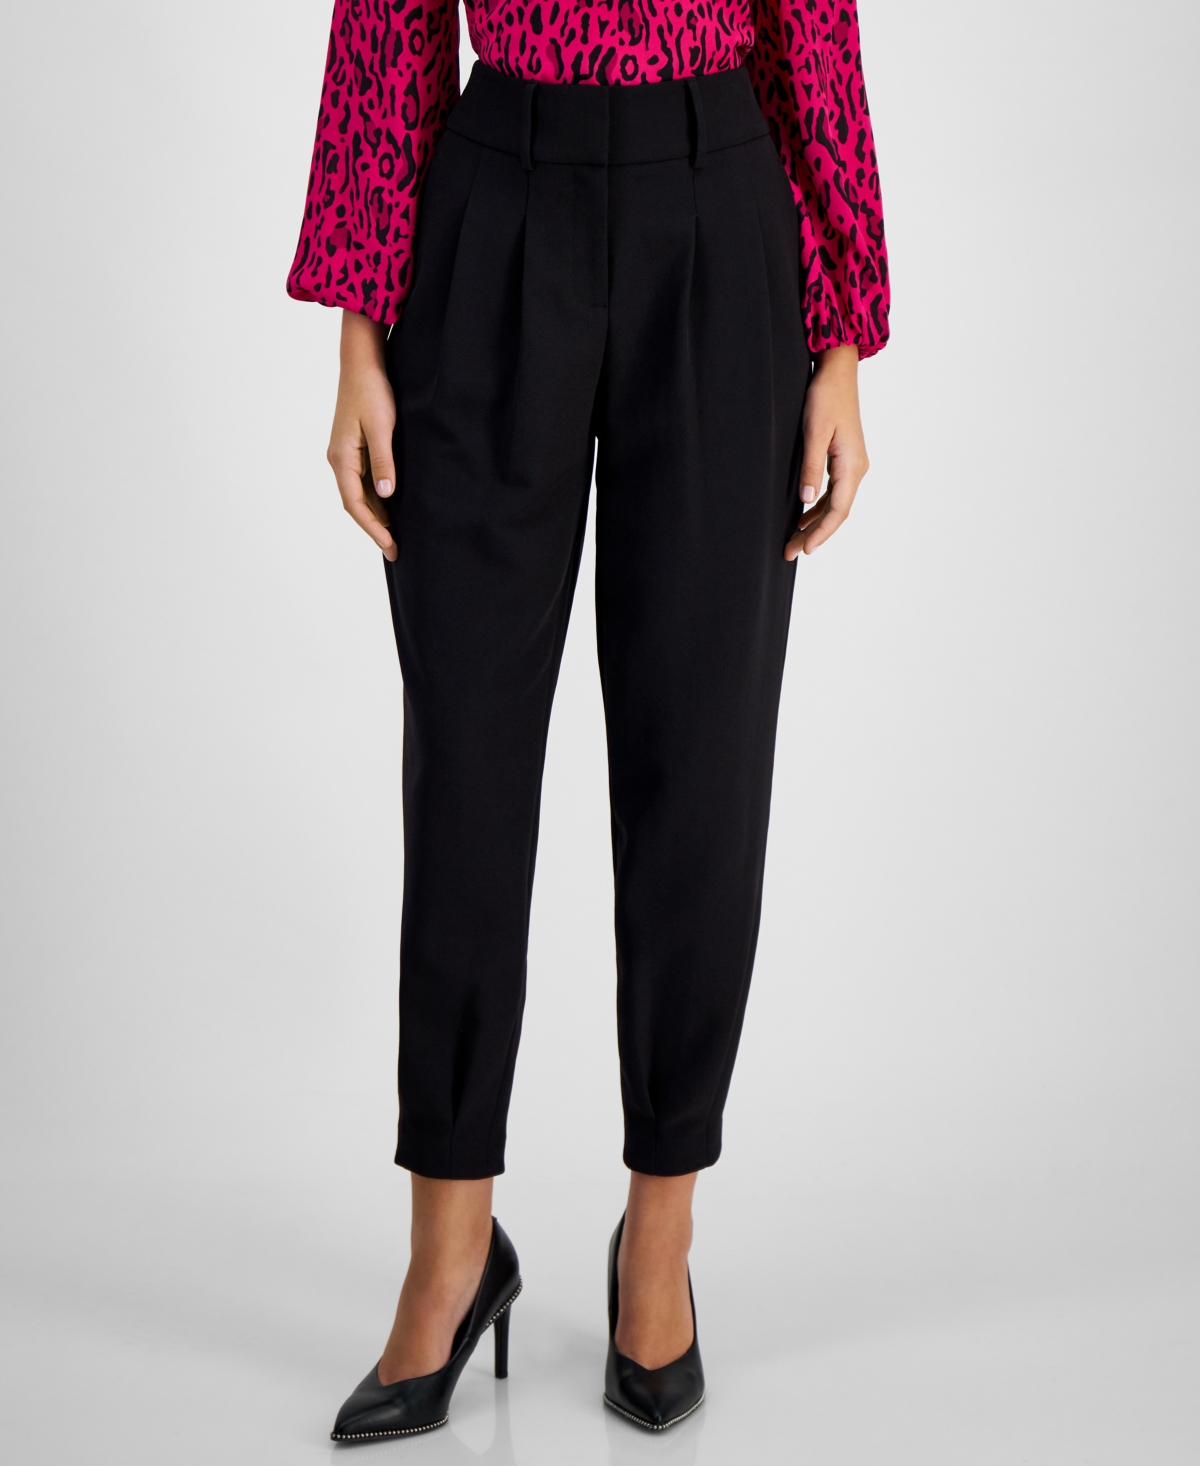  Bar Iii Women's Pleat-Front Mid-Rise Ankle Pants, Created for Macy's